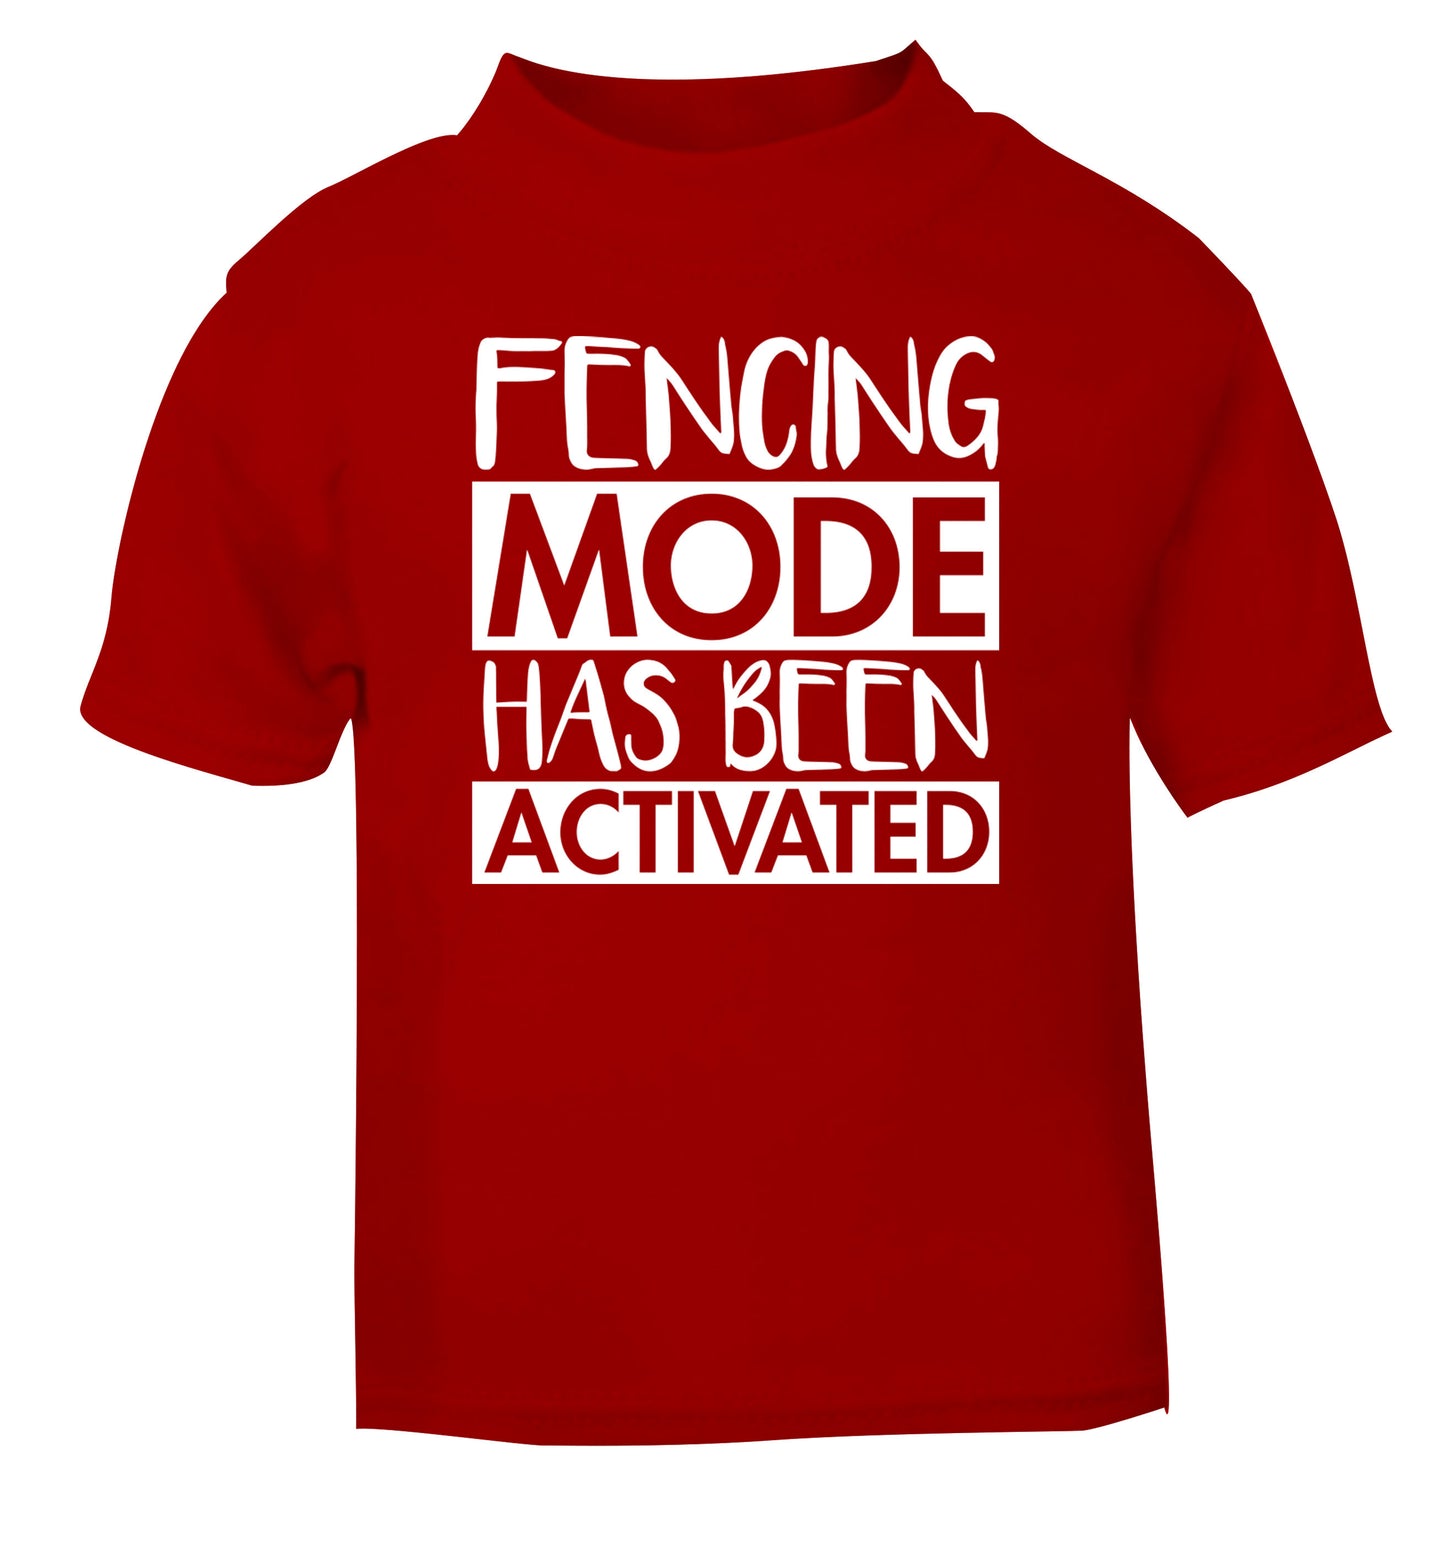 Fencing mode activated red Baby Toddler Tshirt 2 Years